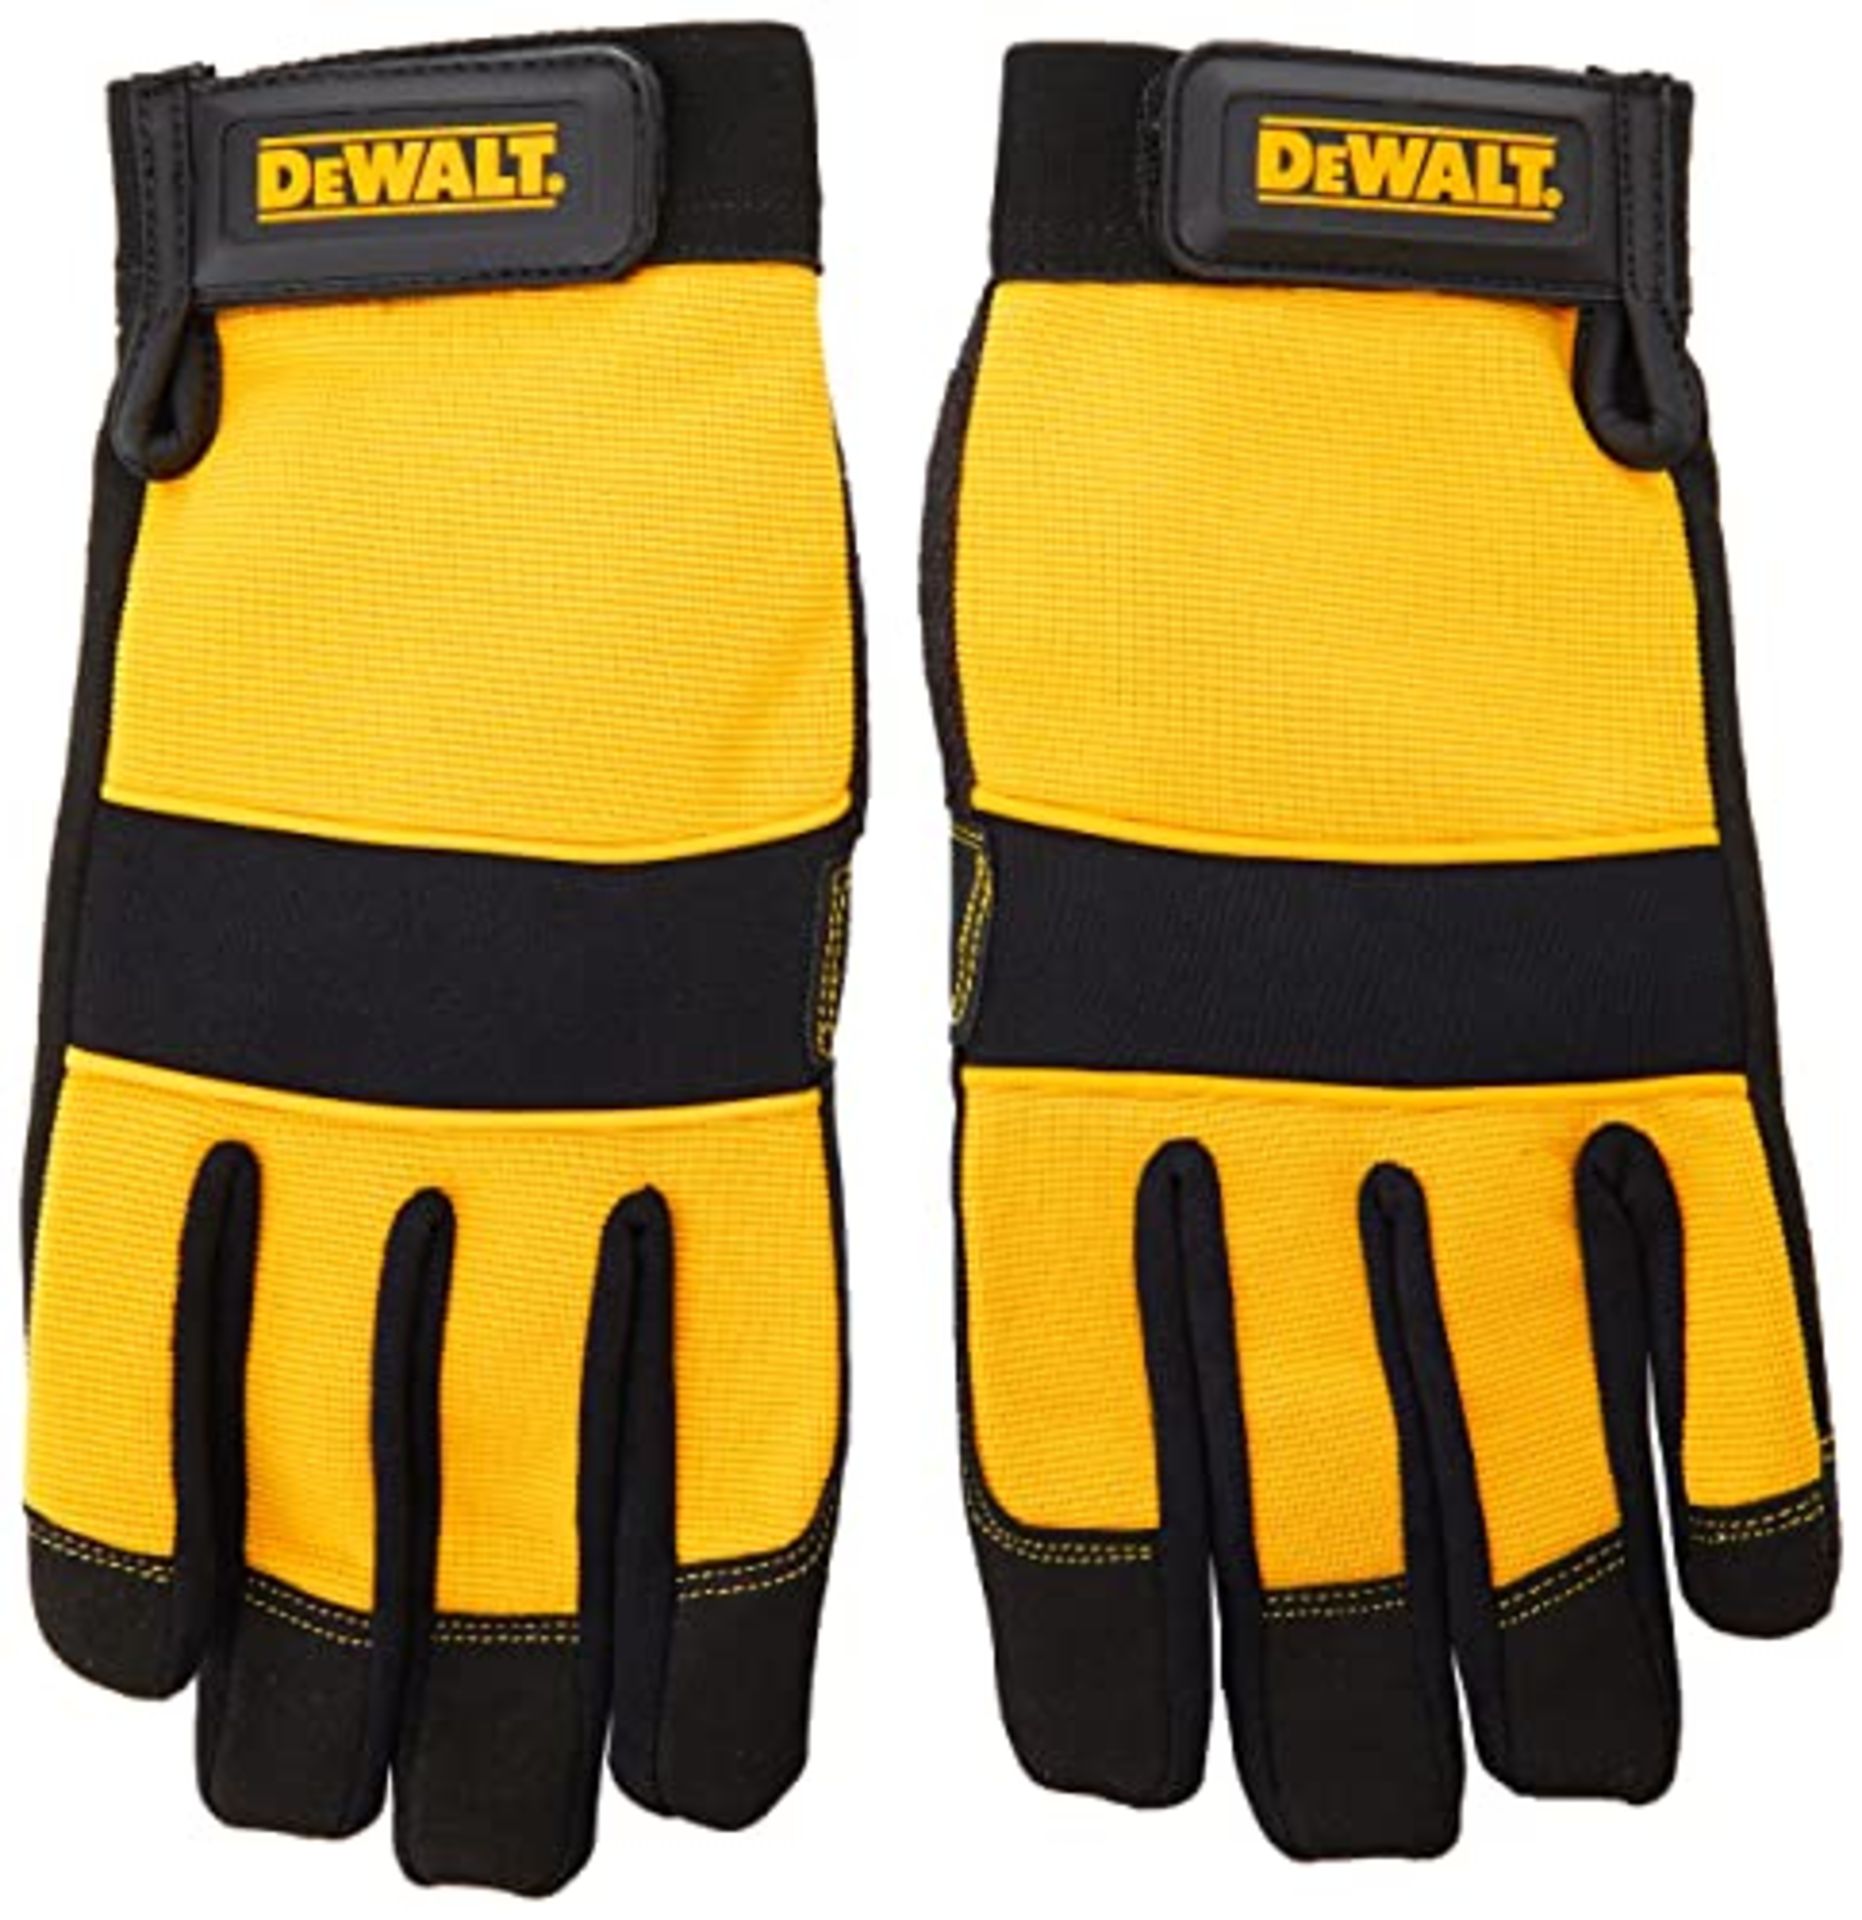 DEWALT Men's - Synthetic Padded Leather Palm Gloves Large, Black/Yellow, L (1 pair)